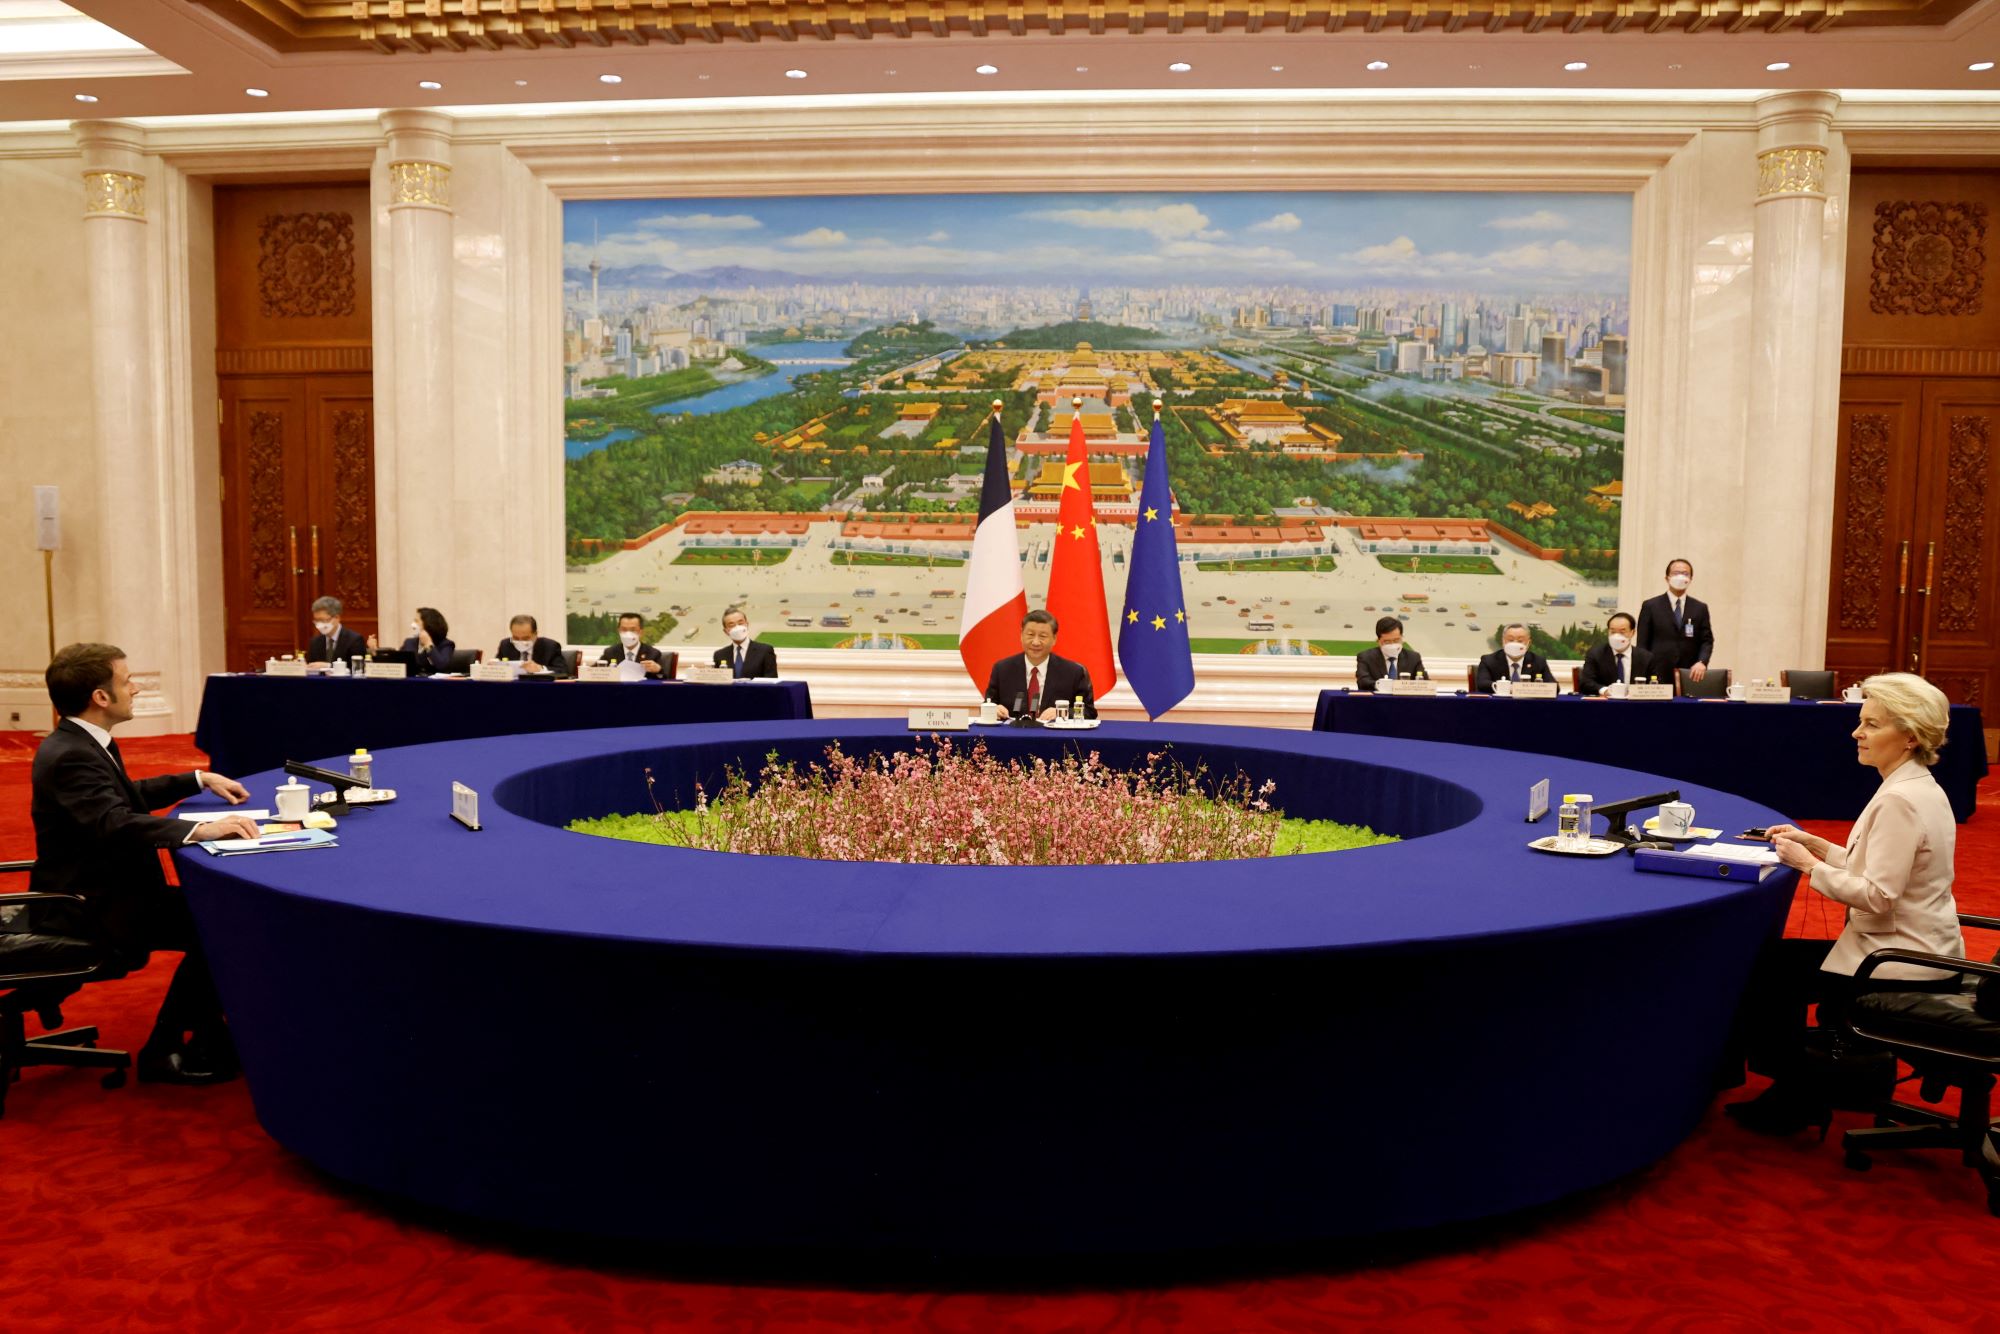 Martin - China's President Xi Jinping, his French counterpart Emmanuel Macron and European Commission President Ursula von de Leyen meet for a working session in Beijing, China April 6, 2023.